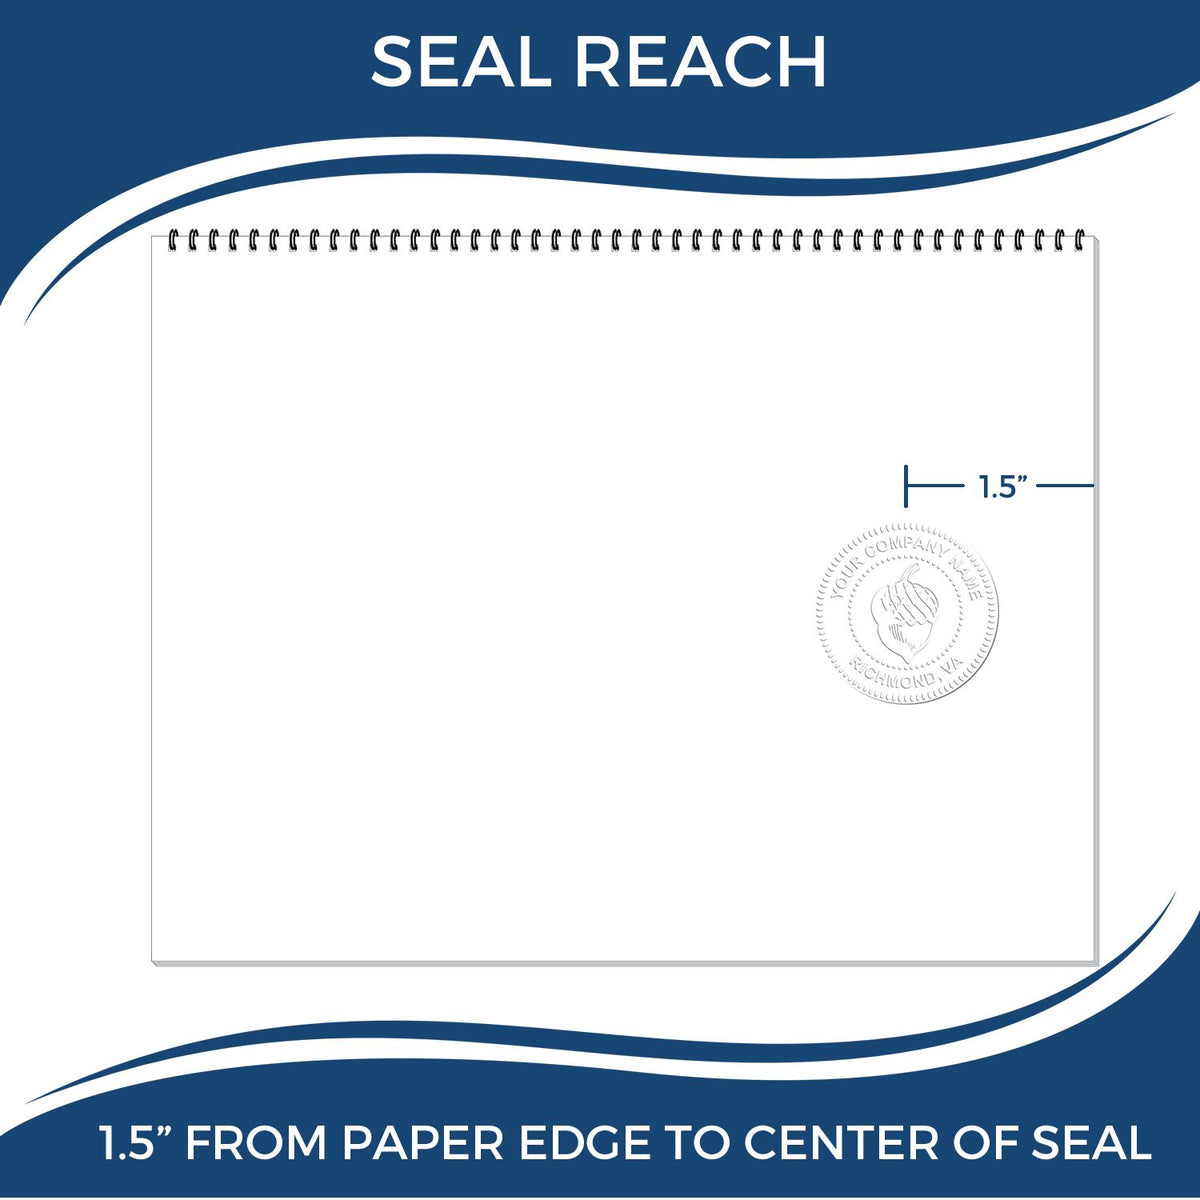 An infographic showing the seal reach which is represented by a ruler and a miniature seal image of the Colorado Desk Architect Embossing Seal